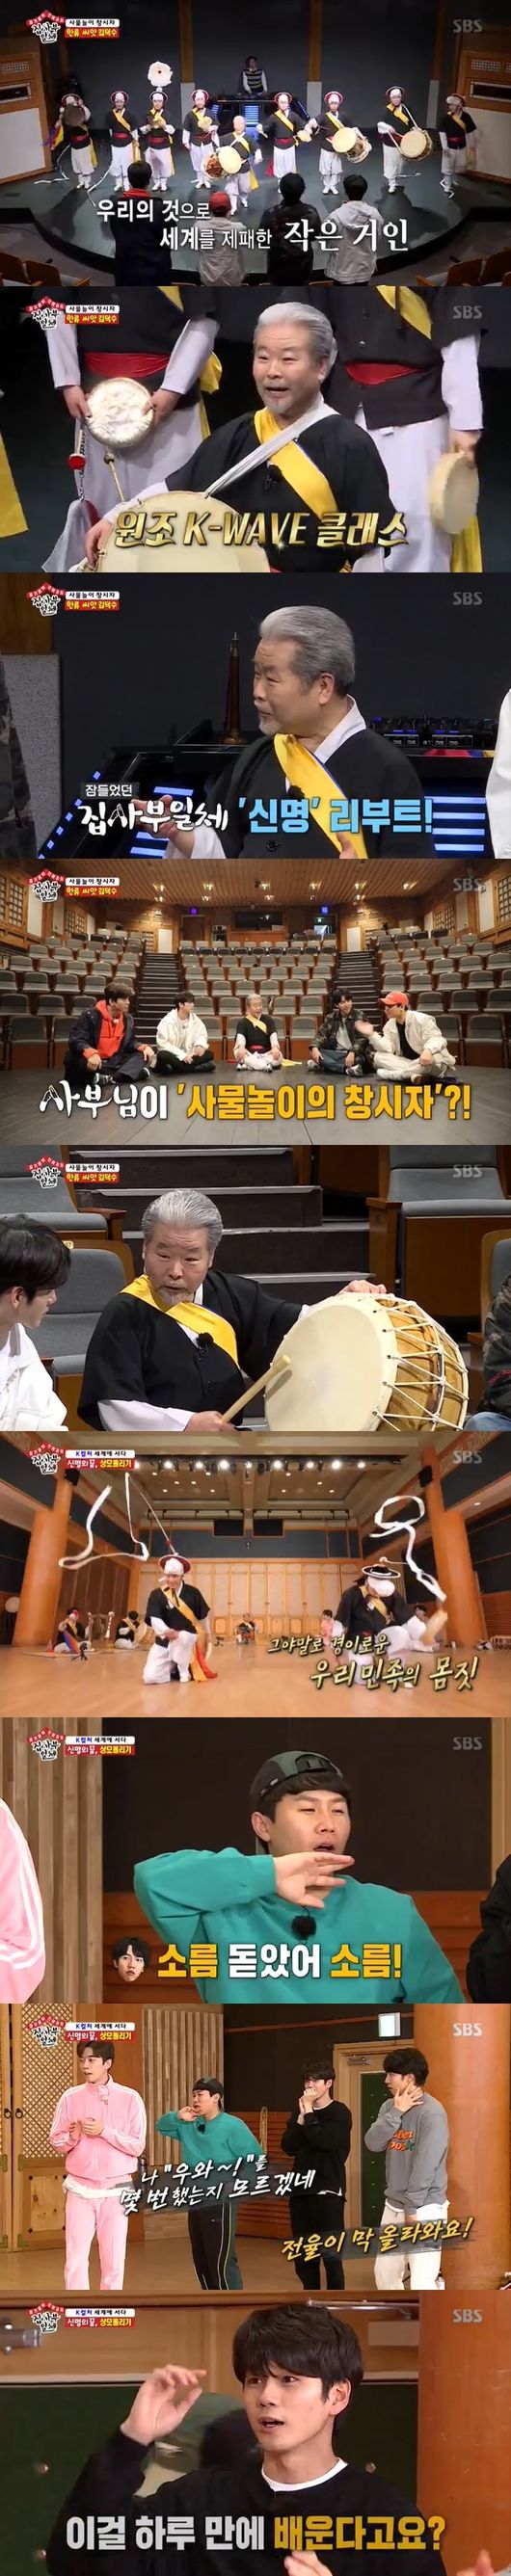 Ong Seong-wu was active as a daily student of All The Butlers, and Aid K-Culture Kim Duk-soo appeared as a master.In SBS All The Butlers broadcasted on the afternoon of the 22nd, The Founder of Samulnori and 40 years of life life Kim Duk-soo appeared.With Lee Sang-yun and Yook Sungjae graduating last week, three people including Lee Seung-gi, Yang Se-hyeong and Shin Sung-rok headed to the shooting location.Lee Seung-gi said, I felt it on the walk, but I feel the orchid. Now I have only a new type. Im going to change my name to a new century.Yang Se-hyeong was very satisfied with his name, saying, The name is not bad. When I saw variety in the past, the victory started as the youngest, but it was 15 to 16 years later.When I see it, I think I will do my youngest when I broadcast it even if I am 60 ~ 70 years old. Lee Seung-gi said, When I see Grandfather than flowers, Baek Il-seop also plays the youngest role. Yang Se-hyeong joked, Get down and Shin Sung-rok work hard as the youngest.I invited a daily student for my youngest Lee Seung-gi, Peadi said, while Lee Seung-gi said, I was curious to see the article and see this Friend come in.Its Friend, which I usually liked: this Friend is a believer and all-around bloke, expected Shin Sung-rok, who doesnt know well but personally likes and likes it.I wanted to meet him, he said.I want to be nice with my wonderful seniors, Ill have fun and go back, said Ong Seong-wu, a daily student.Ong Seong-wu, wearing a mask in the infomation, handed out hand disinfectants to seniors.Please call me my name, Lee Seung-gi said, Then I can not call you easily, and Shin Sung-rok said, Please write your name as a hut.Yang Se-hyeong teased Yong-nyeo Sunwoonyeo.Lee Seung-gi called Ong Seong-wus name, and Ong Seong-wu said, I will start stretching out once.When I saw the opening earlier, the youngest person here said that I should start from the outstretch. Ong Seong-wu recalled the occasion of All The Butlers appearance, saying, Lee Seung-gi came to me (when Master Sean) to massage and give me a warm car.Lee Seung-gi said, Call the voice actor to us as a brother, Shin Sung-rok said, I am just a local fool.However, Lee Seung-gi advised, Seo is a good brother, but he is very difficult and sensitive.Ong Seong-wu said, If you touch me, please tell me. Yang Se-hyeong asked, If you try to get too fast, I feel like Im getting away, so I want you to come closer slowly.Ong Seong-wu asked, Can I get to you two quickly? Yang Se-hyeong asked, I want you to come 10 minutes late.Ong Seong-wu and Yook Sungjae were alumni in school, and Shin Sung-rok asked, Surely Lee Seung-gi is not a role model?It was my role model for a long time, said Ong Seong-wu, and Lee Seung-gi laughed, Im not fooled here anymore.Ong Seong-wu, who knew the master in advance, said, As a pioneer who informed K-culture, I went to World and performed a performance and made a national prestige.Samulnori founder Kim Duk-soo appeared with a cheerful sound, and Yang Se-hyeong said, I hear it with my ears, but it was like listening with my eyes and heart.The cultural genes we have are a new name. We can study the new name we have forgotten today, Kim said.Ive never seen DJ and collaver before, said Kim Duk-soo, Ive been doing it since I was snoring. The most important thing to the world of tows is creation.Traditionalism is not followed and introduced. It has its essence. It keeps it and changes clothes according to the times.Lee Seung-gi asked, Is ballads and collavers possible? and Kim Duk-soo said, Absolutely.World I did the best stars and the star collaboration on the best stage. Kim Duk-soo started his samulnori at the age of seven and won the Presidents Award and was 63 years old.Yang Se-hyeong asked, I was surprised to hear that he was the founder of Samulnori in the video, did not there be a word before that? And Kim said, No.Then, the gwari, gong, janggu, and drums gathered, and the hearing became more important in the visual sense. Kim Duk-soo said that there is a sound of nature that the thing instruments mean, and the drum is cloud, the bridge is thunder and lightning, the gong is wind, and the long is rain.Yang Se-hyeong was attracted to the charm, saying, Its fun to hear the sound of each instrument.Master Kim Duk-soo and members of All The Butlers moved to Bukaksan and said, I will audition for the new name.Shin Sung-rok danced to the hip-hop rhythm of Dongsalpuri, and Kim Duk-soo praised We are natural, so 100 points.Lee Seung-gi began to catch up with Ong Seong-wu in line with the Jajinmori rhythm; Yang Se-hyeong laughed, harshly saying, The more you see, the more you look.The youngest, Ong Seong-wu, performed the movements to the Korean representative rhythm, Good Street, with Lee Seung-gi and Shin Sung-rok saying, He is different from us.Its like a work of art. Kim Duk-soo said, It was like a head spin like a b-boying. I expect there will be a chance to do a head spin tomorrow. Kim Duk-soo said, Lets do the last thing together. Arirang and Doraji are the three-piece rhythm. Kim Duk-soo, who saw the members god name, praised Everybody is great.All The Butlers, who had a time to turn the high-level aunt and watched the performance of the experts, admired it.But the expression quickly hardened when they said they should be Top Model: You learn this in a day? but actually Top Model to turn the aunt.The mother is to turn it to a pent roof (the back of the knee) rather than a neck or head.Lee Seung-gi showed signs of body size, but the youngest Ong Seong-wu and Yang Se-hyeong were by far Ace.Ong Seong-wu also succeeded in turning eight and twelve mothers, which were difficult for experts, including basic mothers. Lee Seung-gi said, Is the time of the short week,I tried to get on the spot and laughed.Yang Se-hyeong, who felt a rivalry to Ong Seong-wu, sat down, stood up, and fell down.Ong Seong-wu also demonstrated his ability to turn his aunt without backing down, and this time Lee Seung-gi coveted him as a new member, saying, If you are busy, how about the fourth week, how about anger?Kim Duk-soo declared, One of the best people in this is trying to make his debut in my performance by solo.After that, he trained to turn his aunt and hit the water bottle, and Ong Seong-wu and Yang Se-hyeong both performed correctly; Kim Duk-soo wondered which of the two would choose.All The Butlers broadcast screen capture